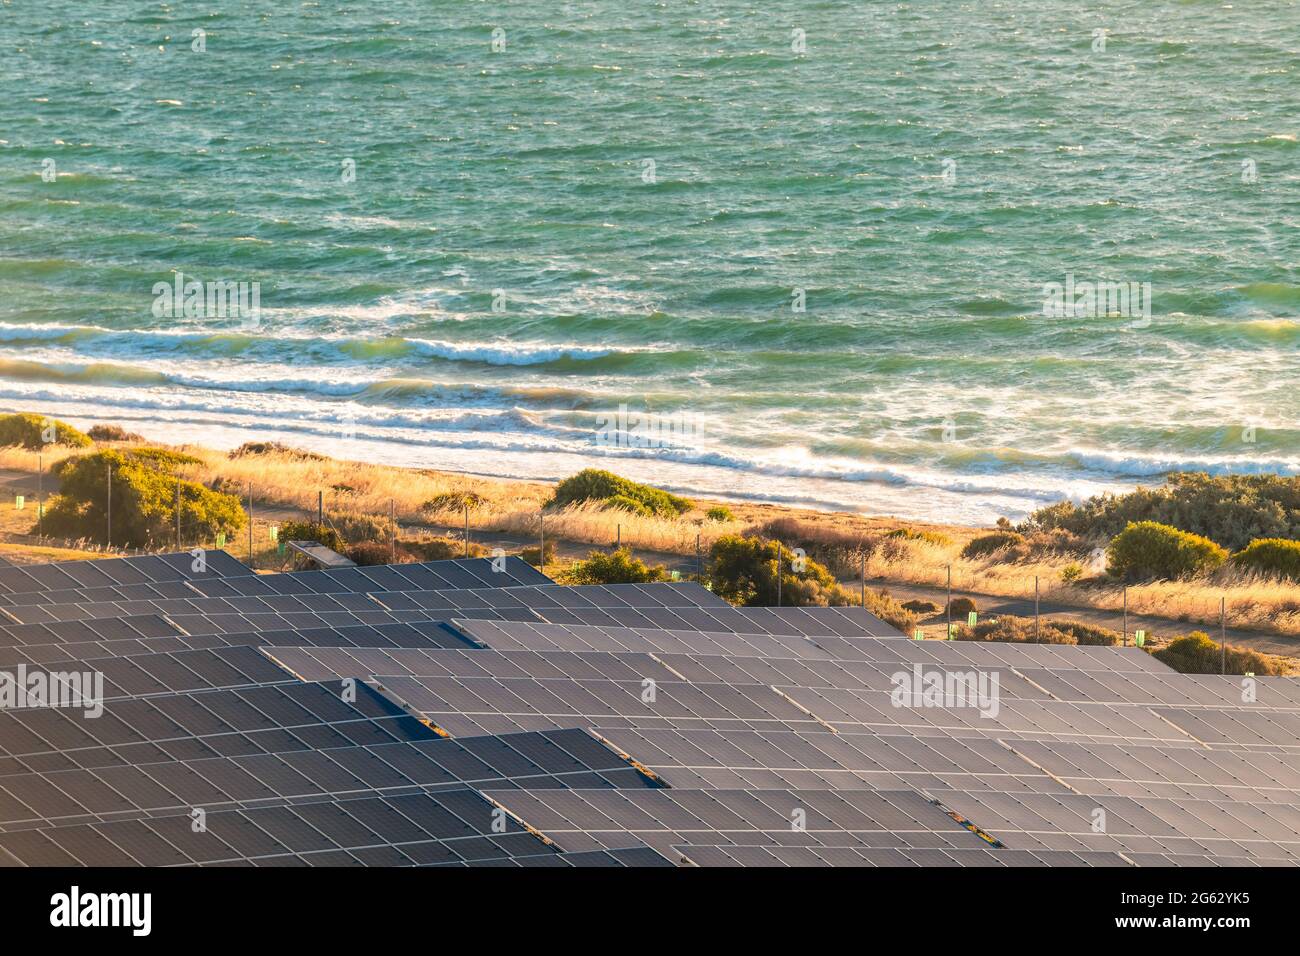 Solar panels installed along the sea shore at sunset in South Australia Stock Photo